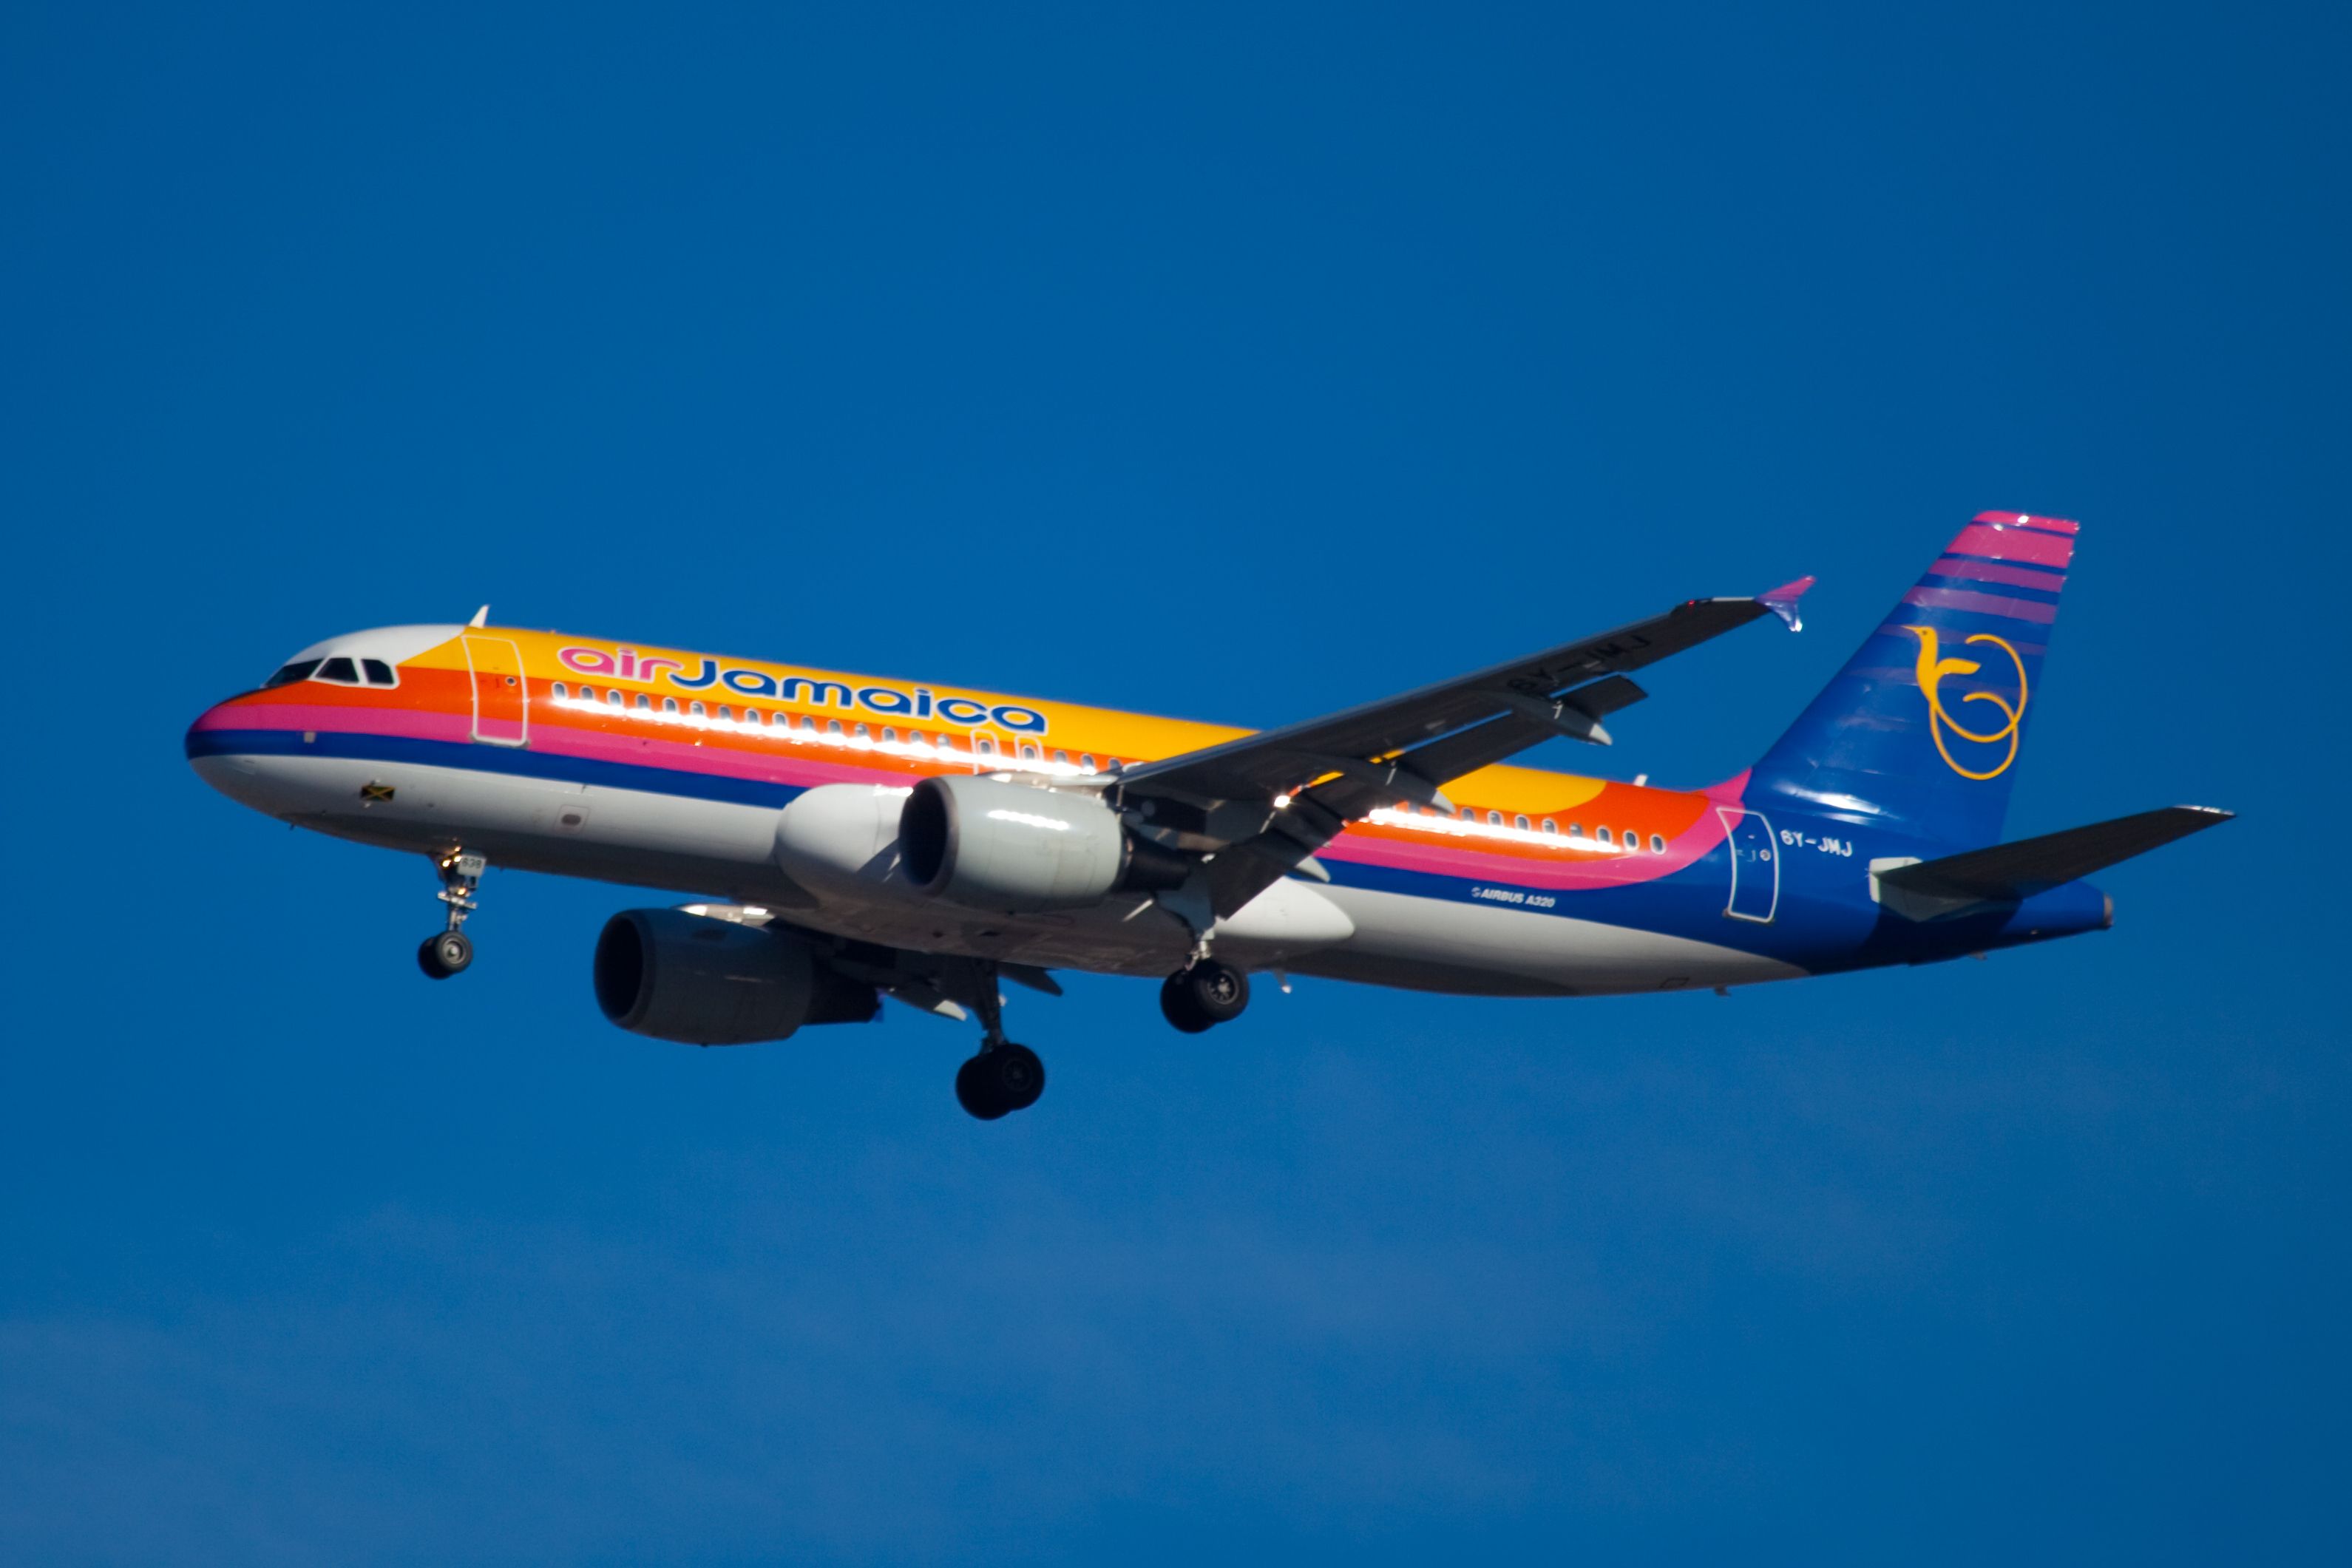 An Air Jamaica Airbus A320 Flying in the sky.